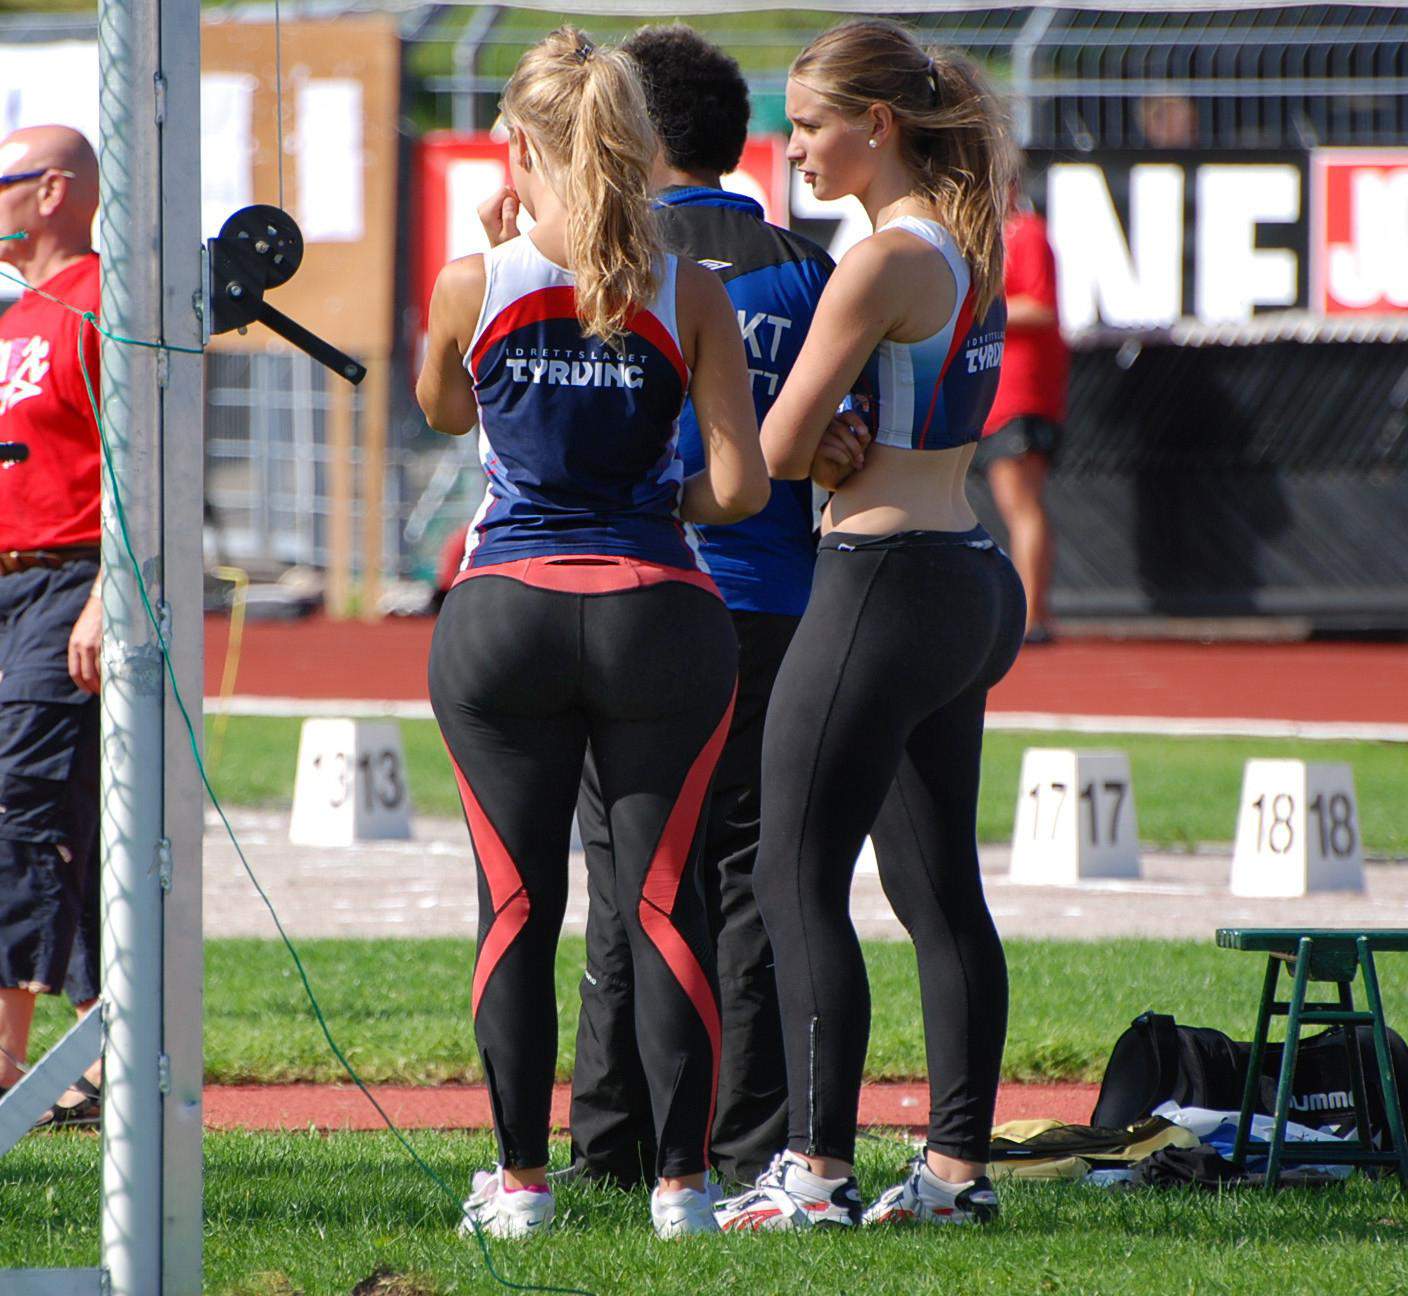 MIND BLOWING TRACK AND FIELD BOOTY - GirlsInYogaPants.com